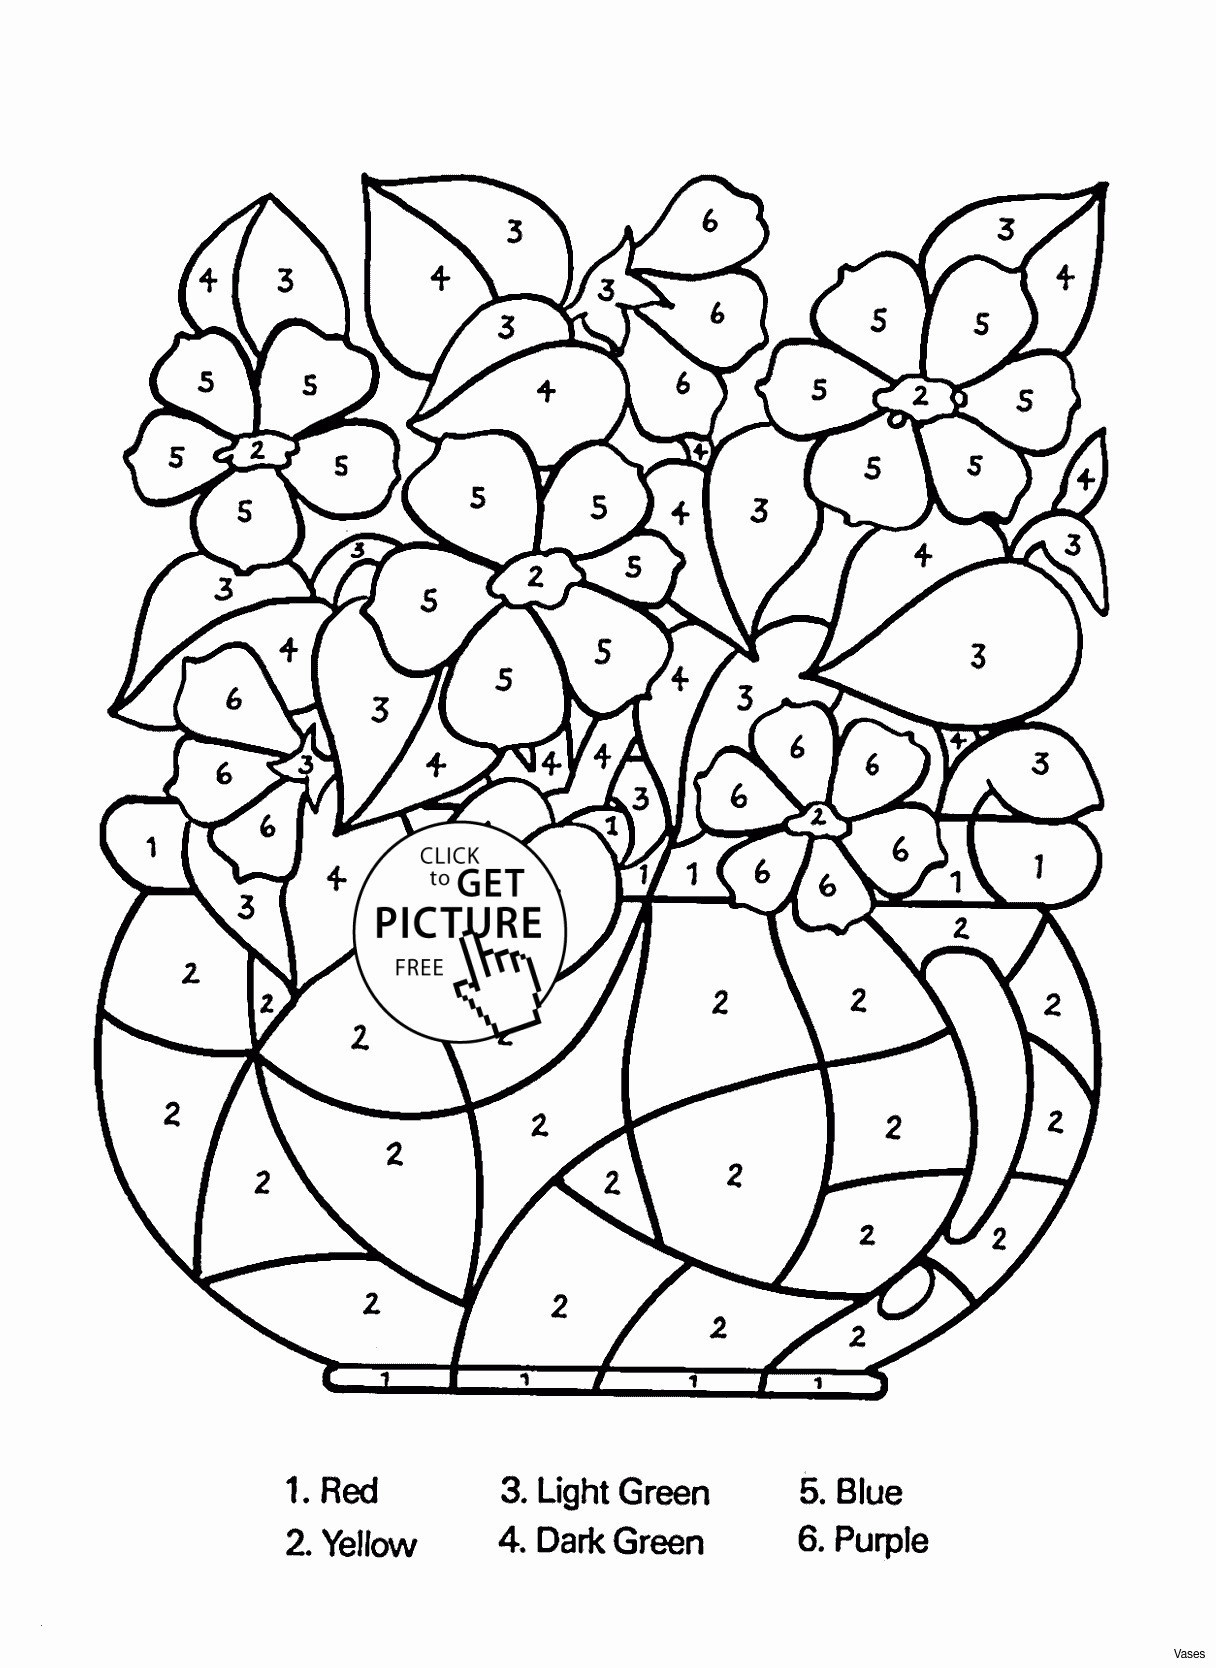 22 Awesome Ceramic Flower Frog Vase 2024 free download ceramic flower frog vase of red flower vase images free flower coloring pages awesome vases within free flower coloring pages awesome vases flower vase coloring page